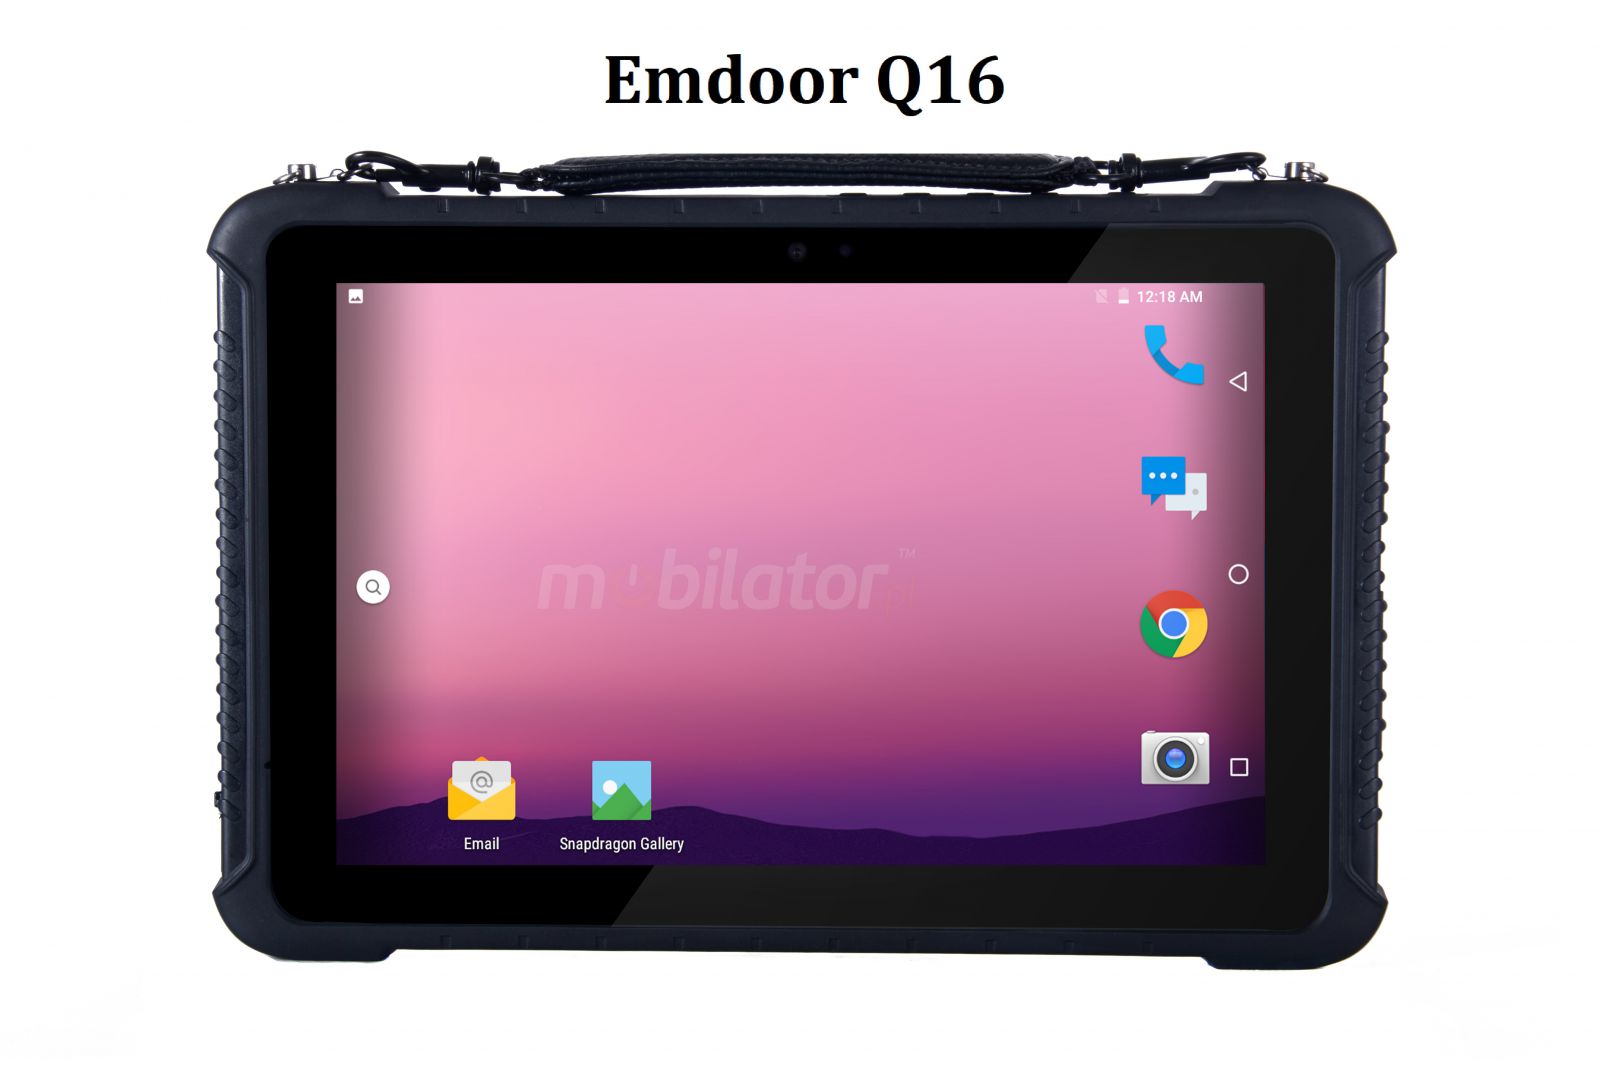 Emdoor Q16 v.4 - industrial waterproof tablet with Android 9.0 and NFC, AR Film, 64GB disk and 4GB RAM, IP65 standard, BT 4.1 